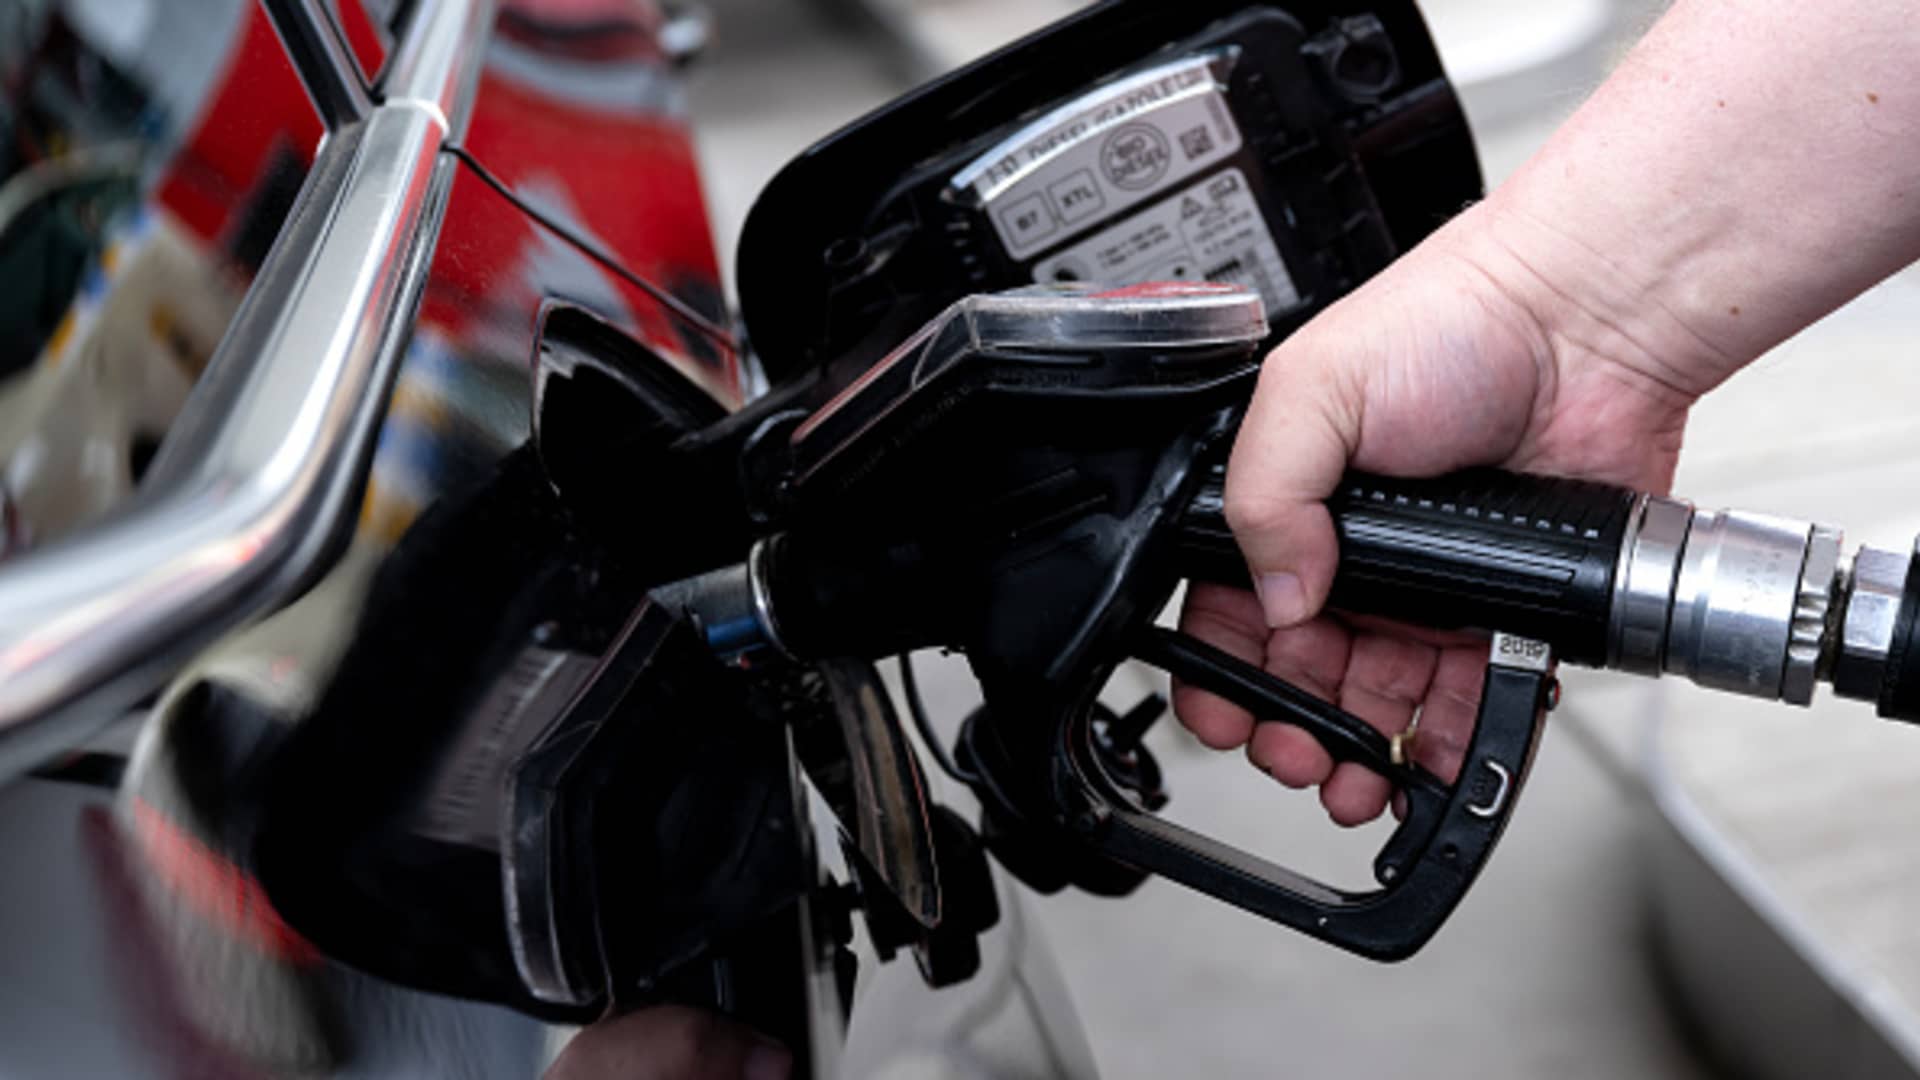 As gas hits $8.60 a gallon in the UK, Brits pay $125 to fill a family car